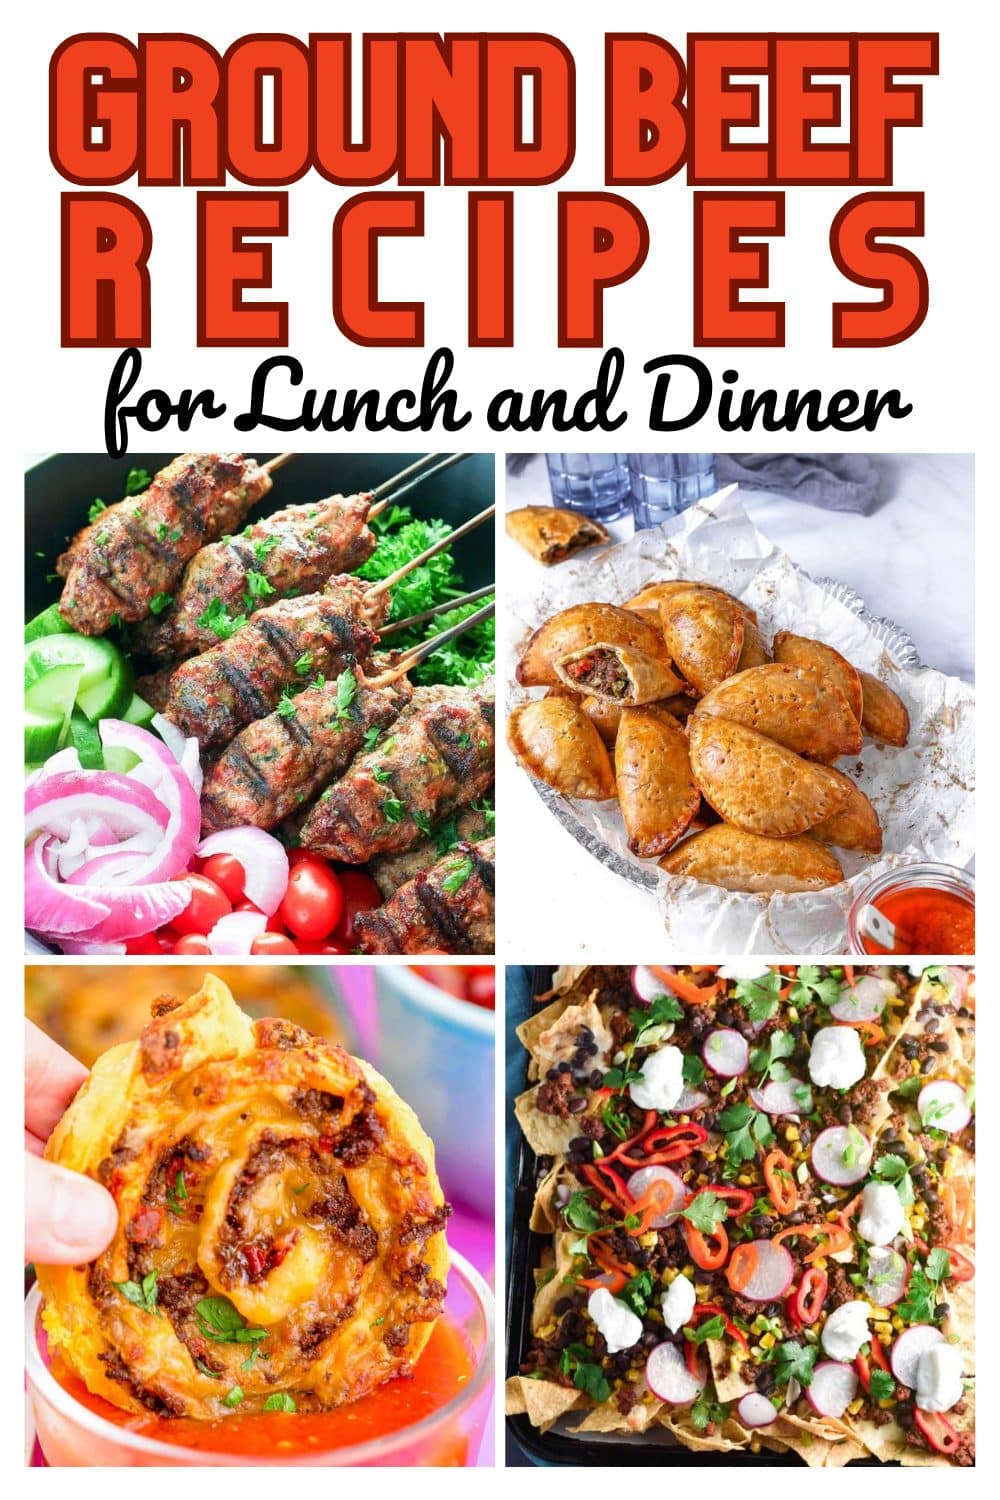 Ground Beef Recipes for Lunch and Dinner